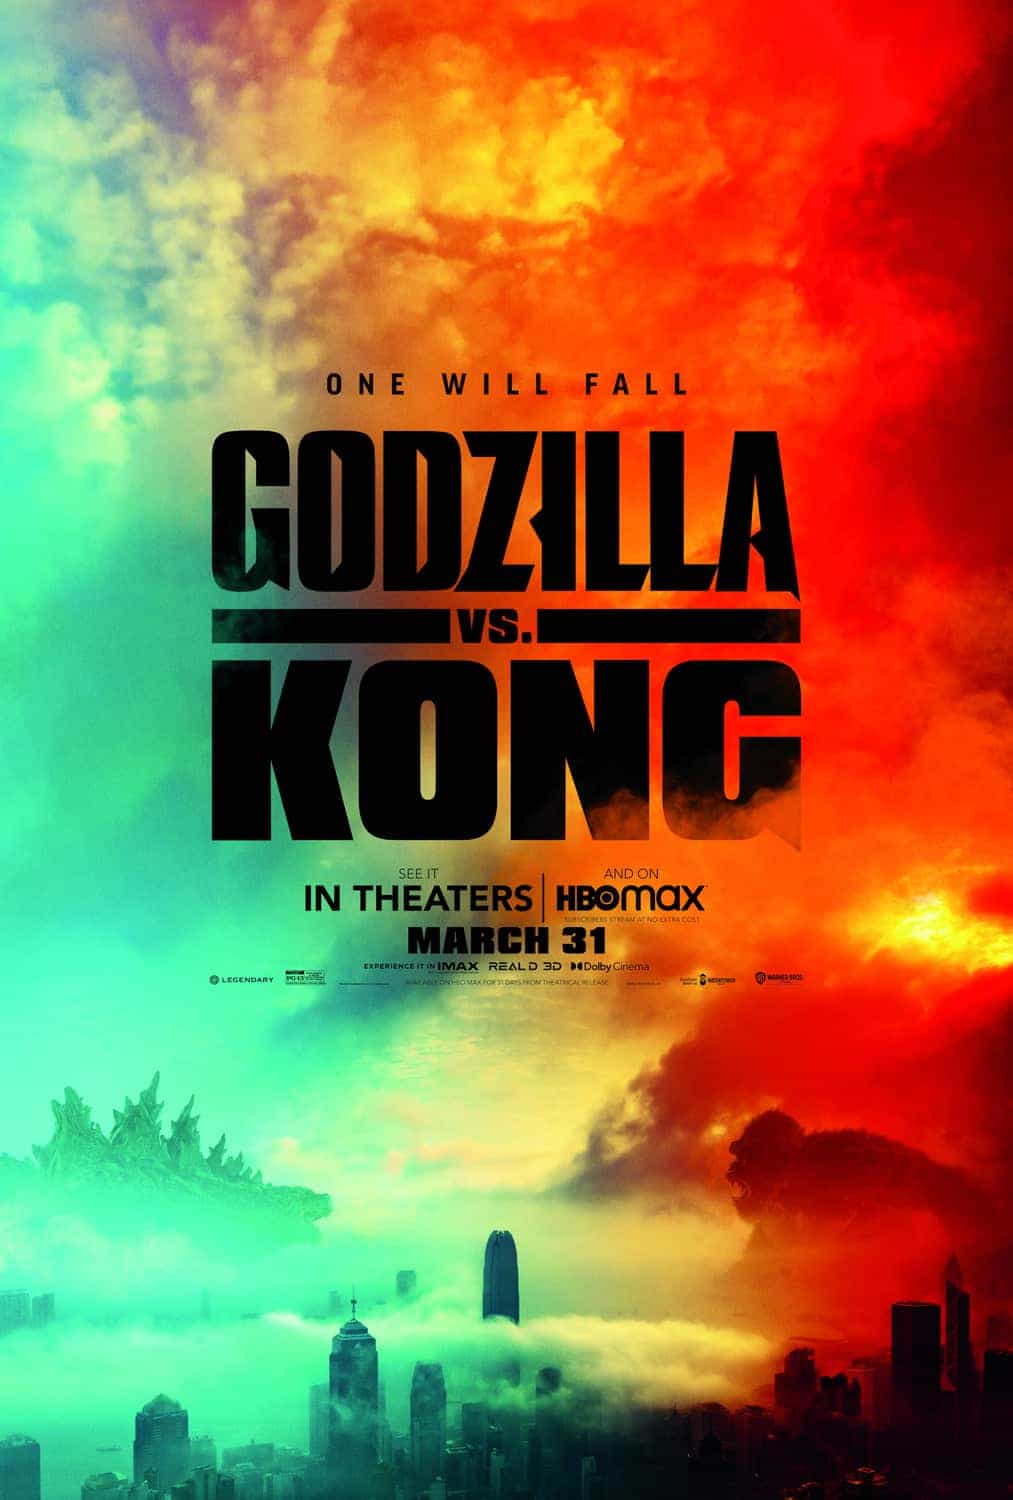 Box office in America shows biggest sign of recovery so far as Godzilla Vs Kong has first day gross of nearly $10 Million